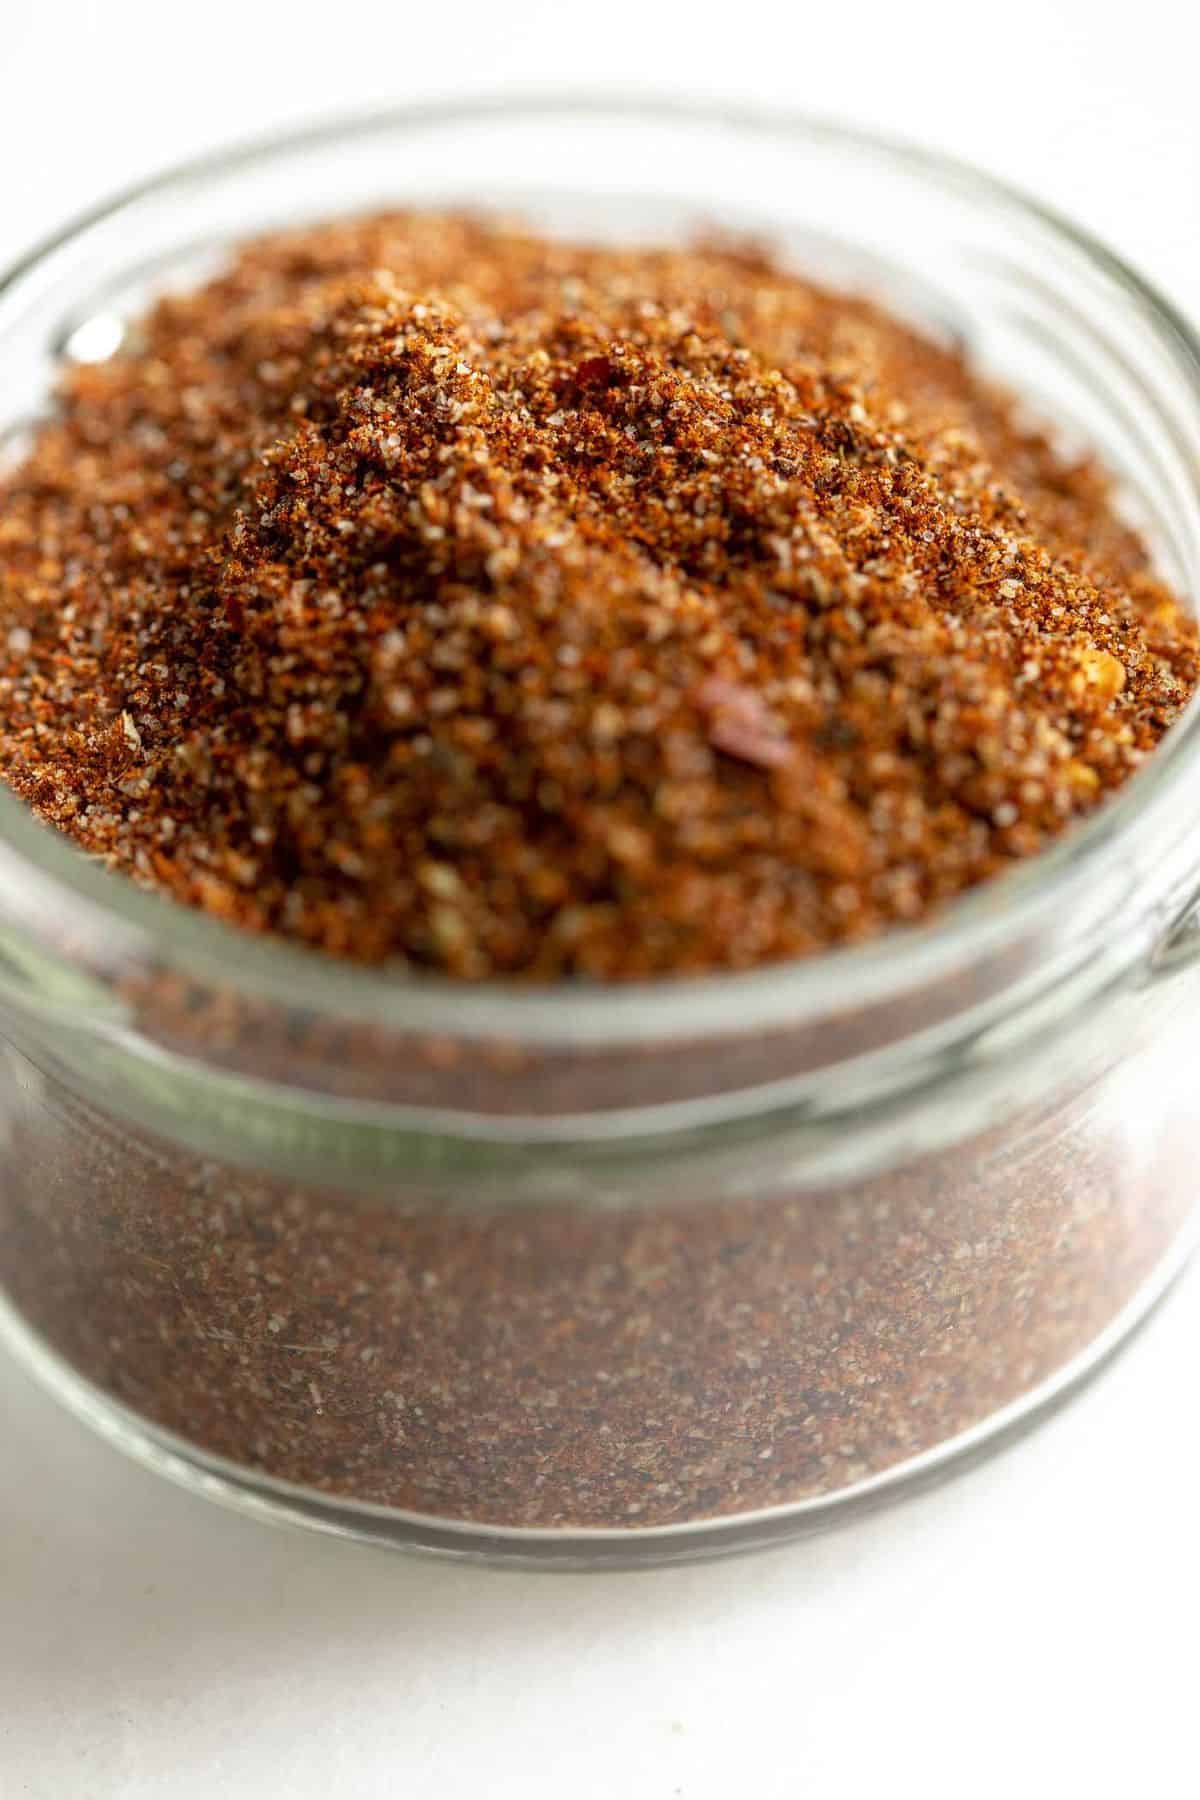 White counter top, small glass jar filled with spice mix, very close up..